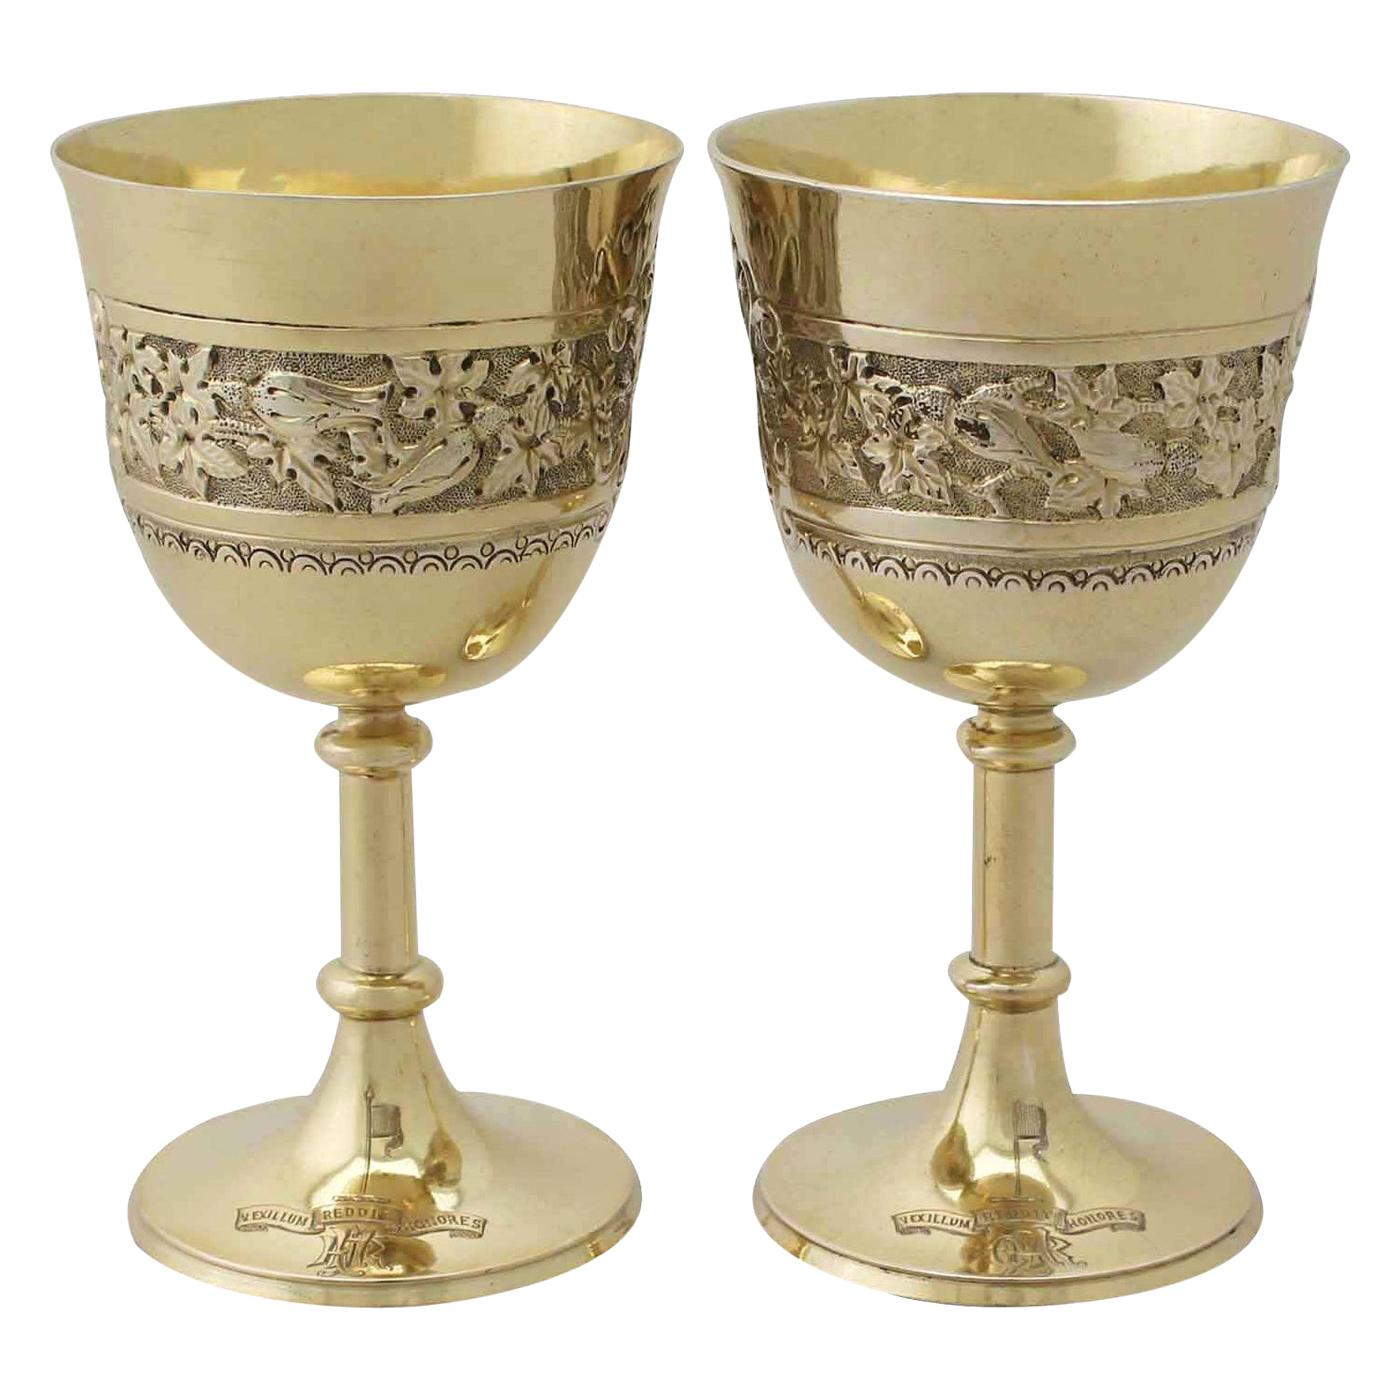 Stephen Smith Antique Victorian Pair of Sterling Silver Gilt Goblets